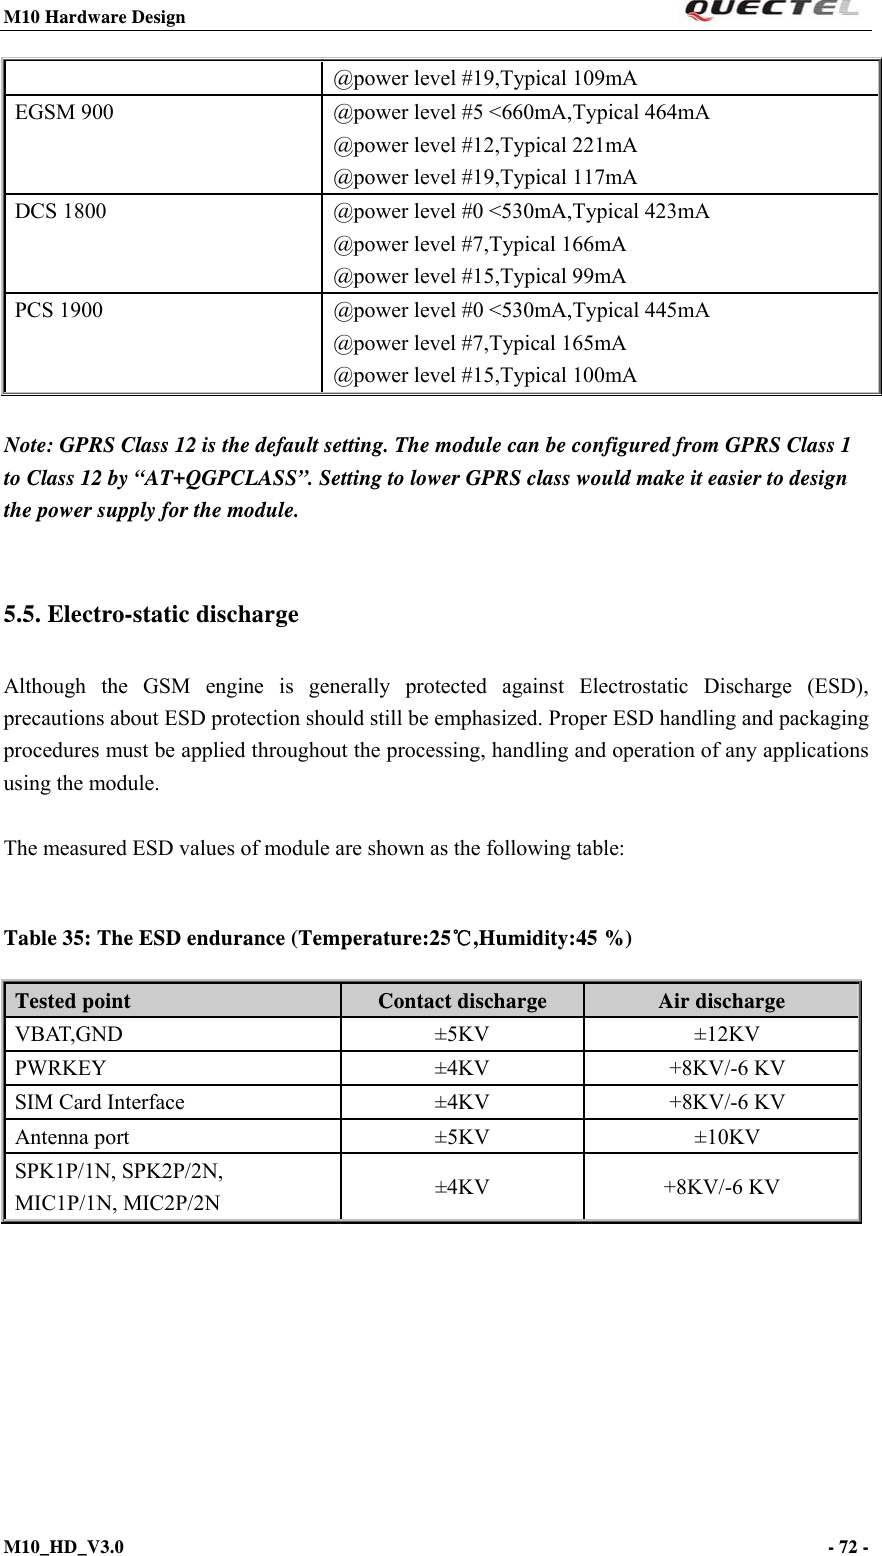 M10 Hardware Design                                                                 M10_HD_V3.0                                                                      - 72 -  @power level #19,Typical 109mA EGSM 900  @power level #5 &lt;660mA,Typical 464mA @power level #12,Typical 221mA @power level #19,Typical 117mA DCS 1800  @power level #0 &lt;530mA,Typical 423mA @power level #7,Typical 166mA @power level #15,Typical 99mA PCS 1900  @power level #0 &lt;530mA,Typical 445mA @power level #7,Typical 165mA @power level #15,Typical 100mA  Note: GPRS Class 12 is the default setting. The module can be configured from GPRS Class 1 to Class 12 by “AT+QGPCLASS”. Setting to lower GPRS class would make it easier to design the power supply for the module.  5.5. Electro-static discharge   Although the GSM engine is generally protected against Electrostatic Discharge (ESD), precautions about ESD protection should still be emphasized. Proper ESD handling and packaging procedures must be applied throughout the processing, handling and operation of any applications using the module.  The measured ESD values of module are shown as the following table:  Table 35: The ESD endurance (Temperature:25℃,Humidity:45 %) Tested point  Contact discharge  Air discharge VBAT,GND ±5KV  ±12KV PWRKEY ±4KV  +8KV/-6 KV SIM Card Interface  ±4KV    +8KV/-6 KV Antenna port    ±5KV    ±10KV SPK1P/1N, SPK2P/2N, MIC1P/1N, MIC2P/2N  ±4KV +8KV/-6 KV   